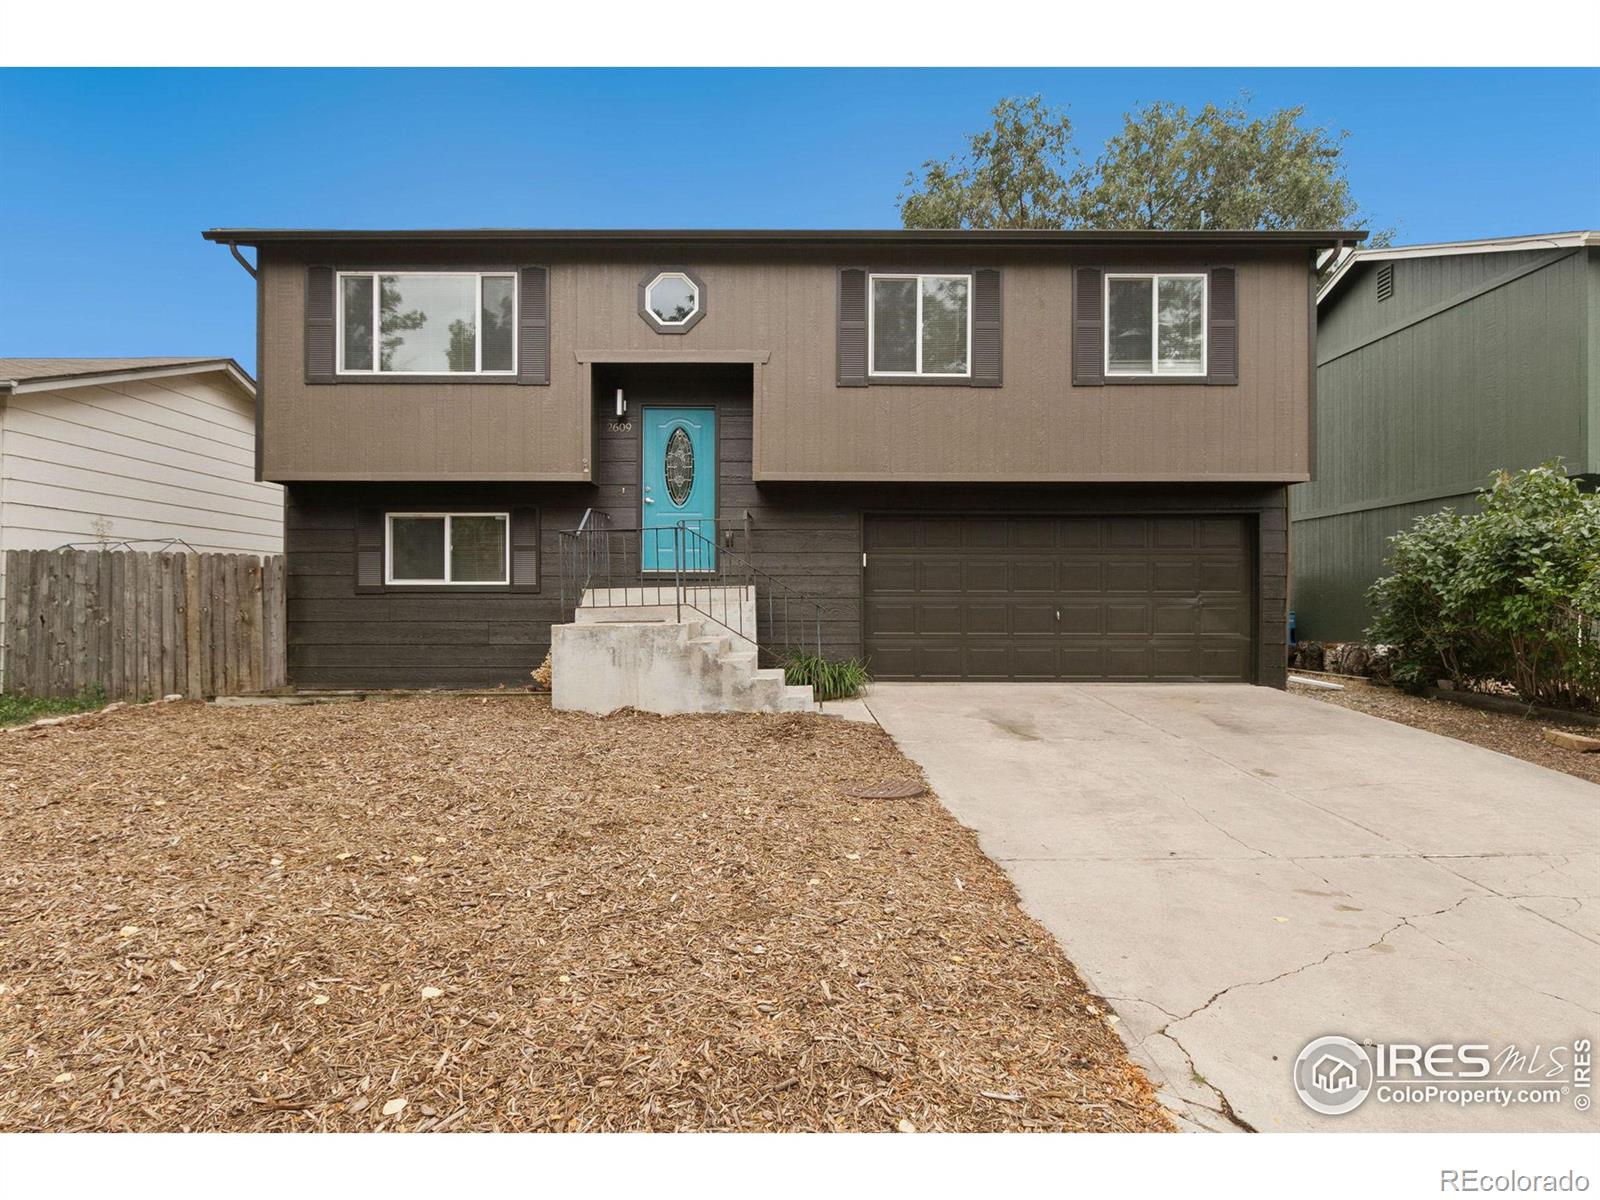 2609  Cherly Street, fort collins MLS: 123456789998556 Beds: 4 Baths: 2 Price: $463,000